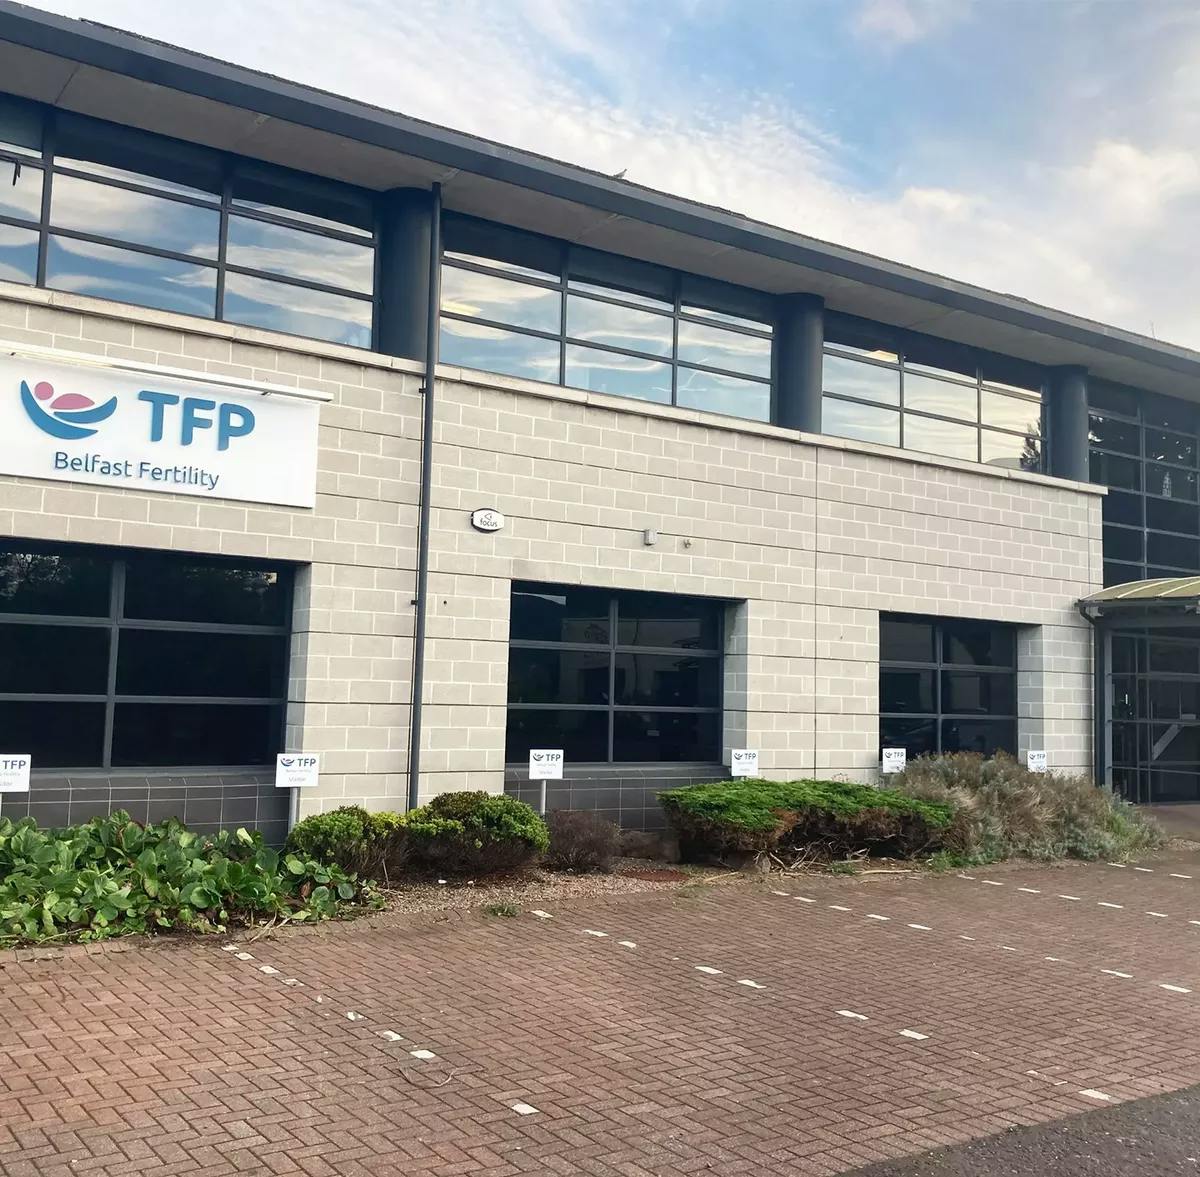 Our TFP clinic in Belfast